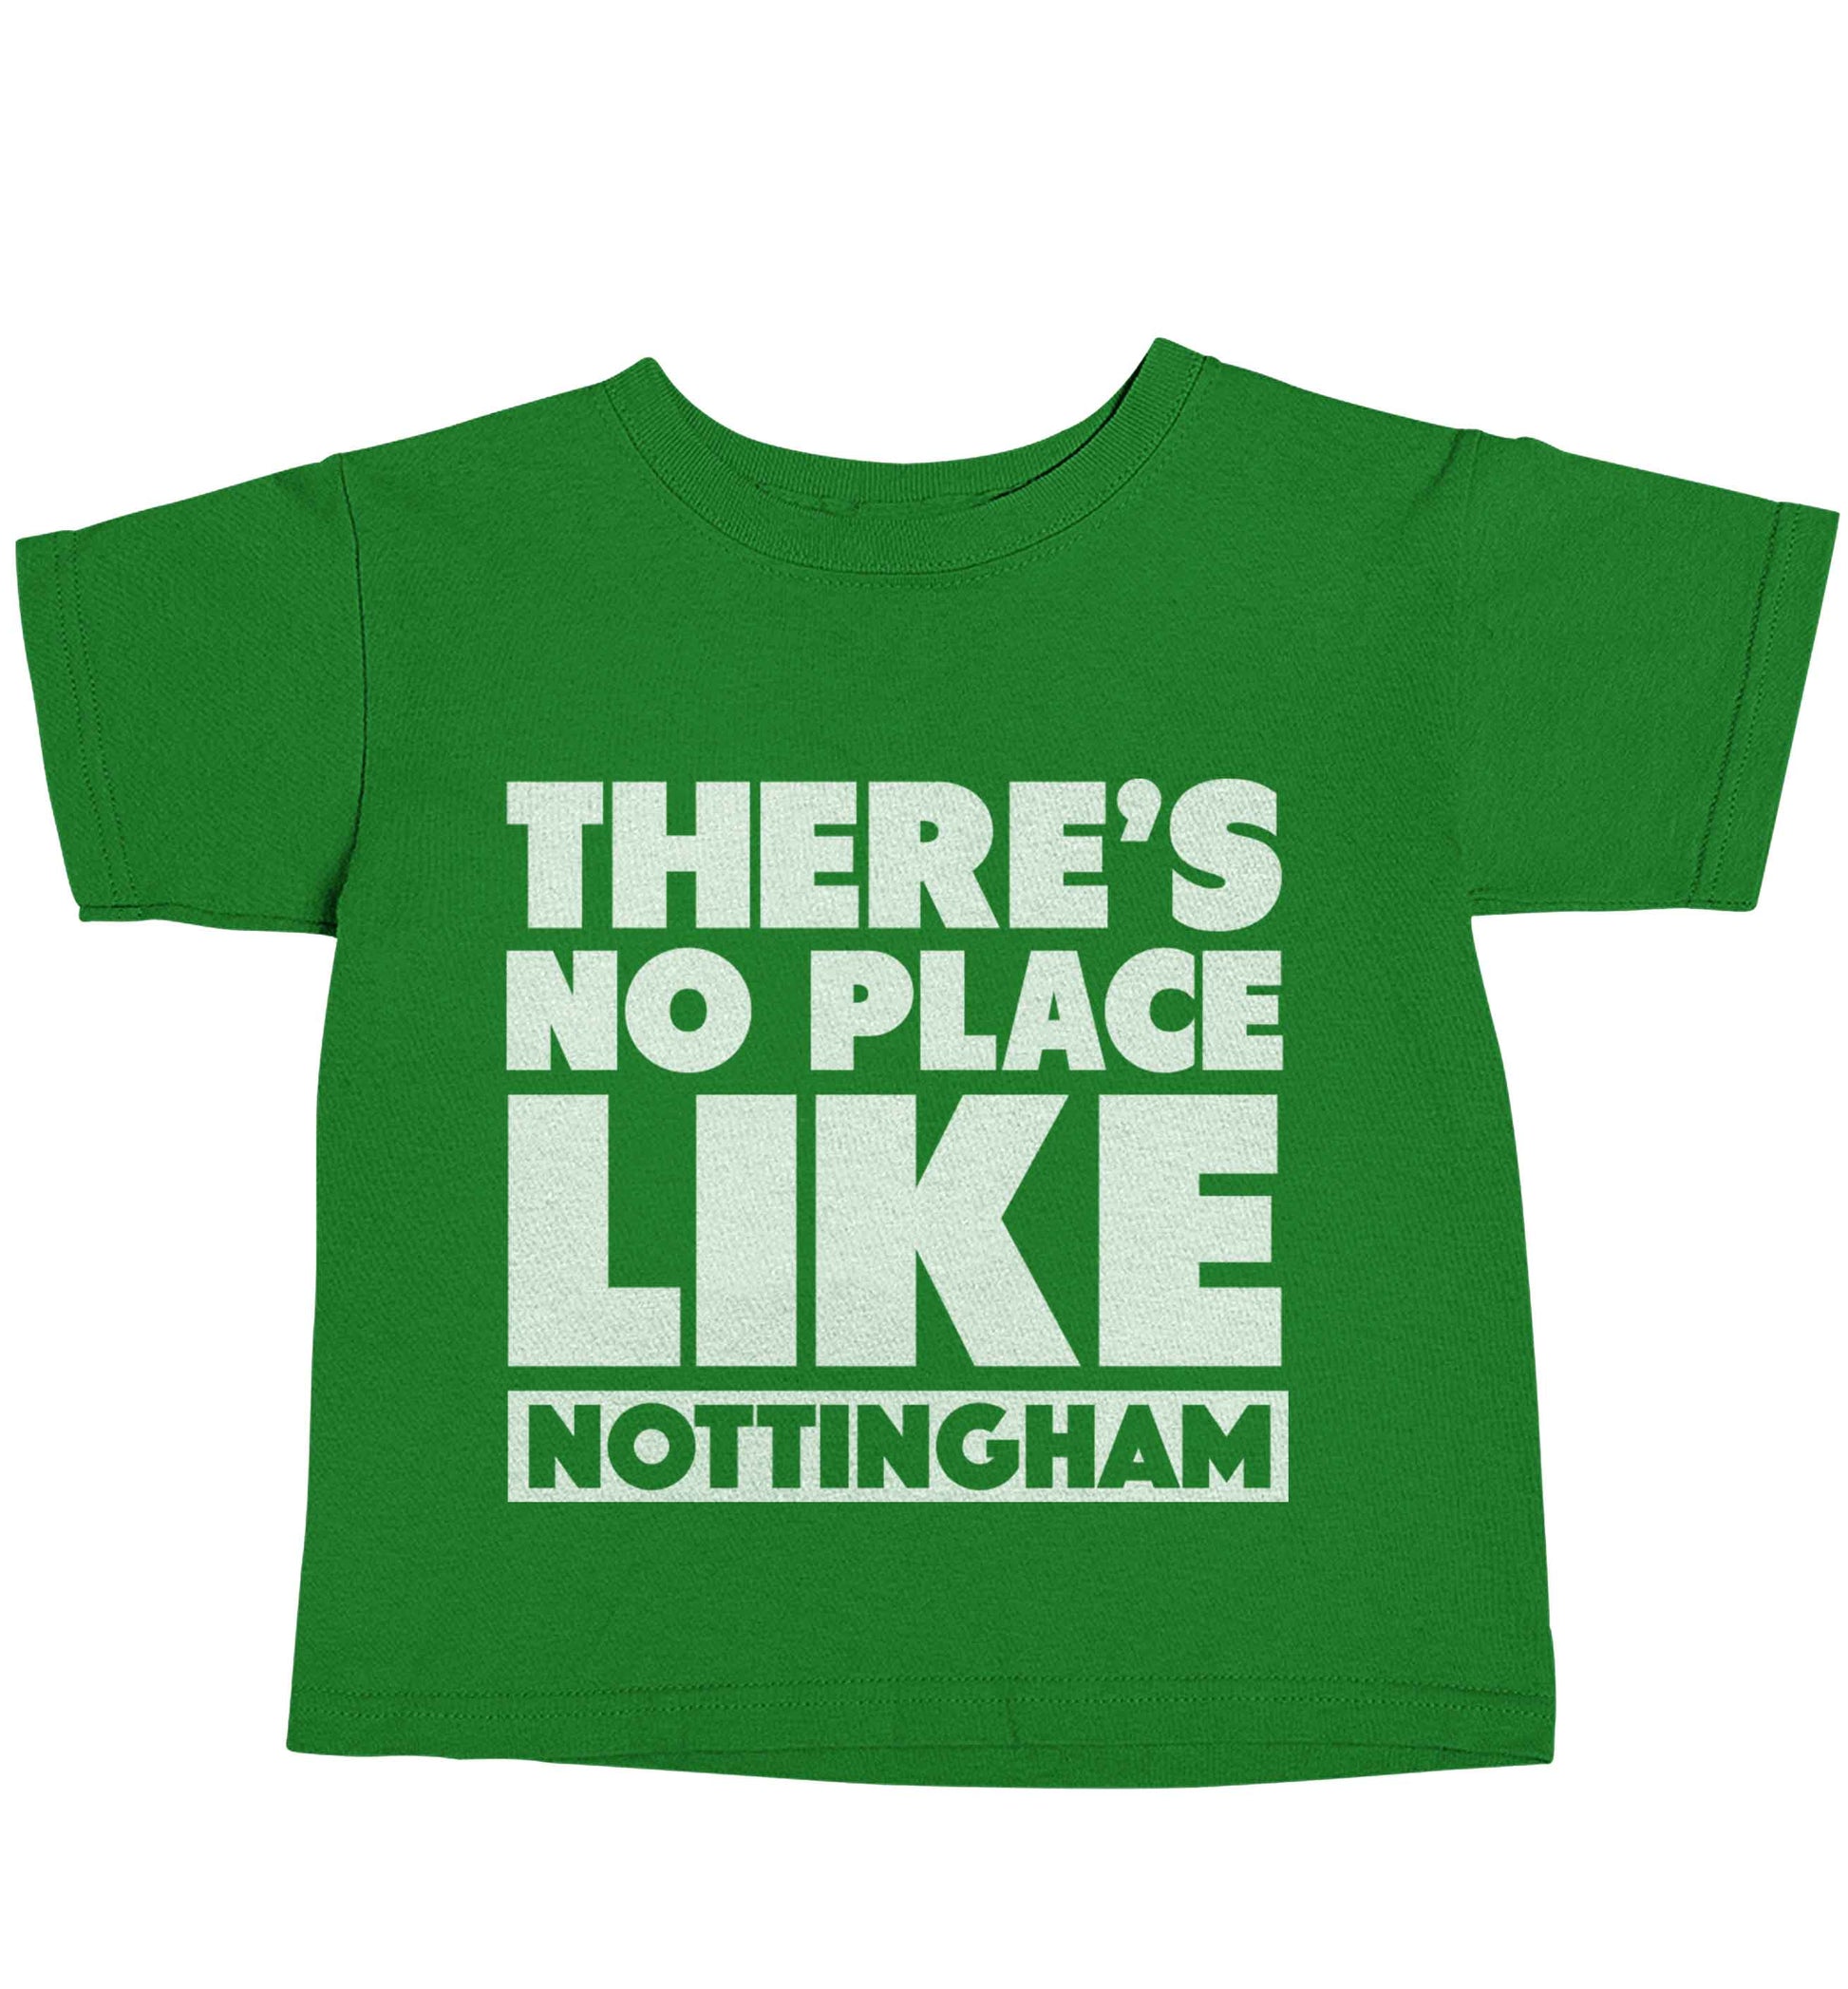 There's no place like Nottingham green baby toddler Tshirt 2 Years